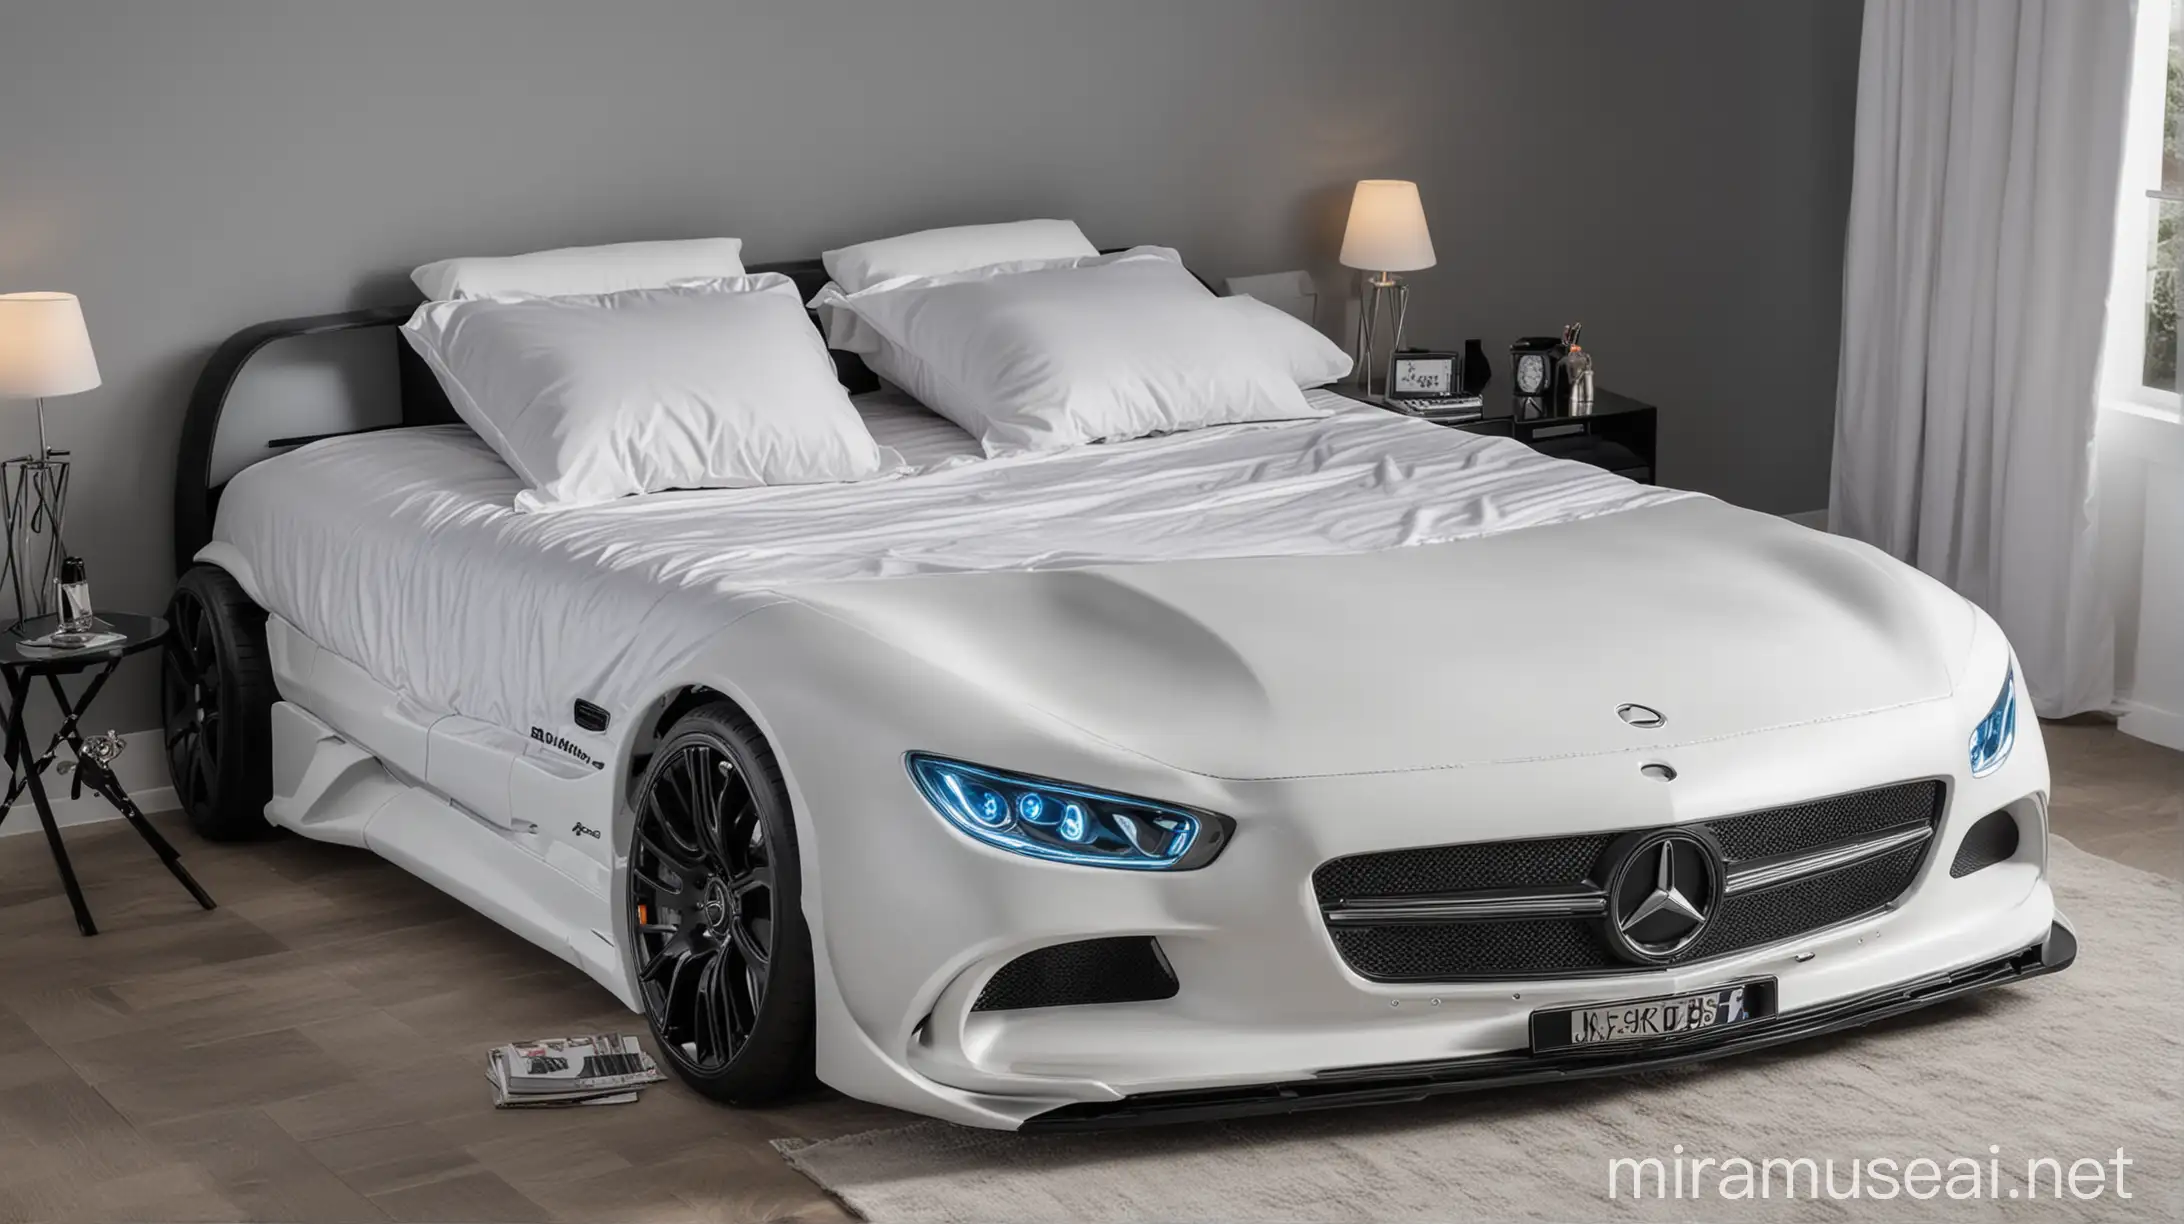 Double bed in the shape of a Mercedes amg automobile